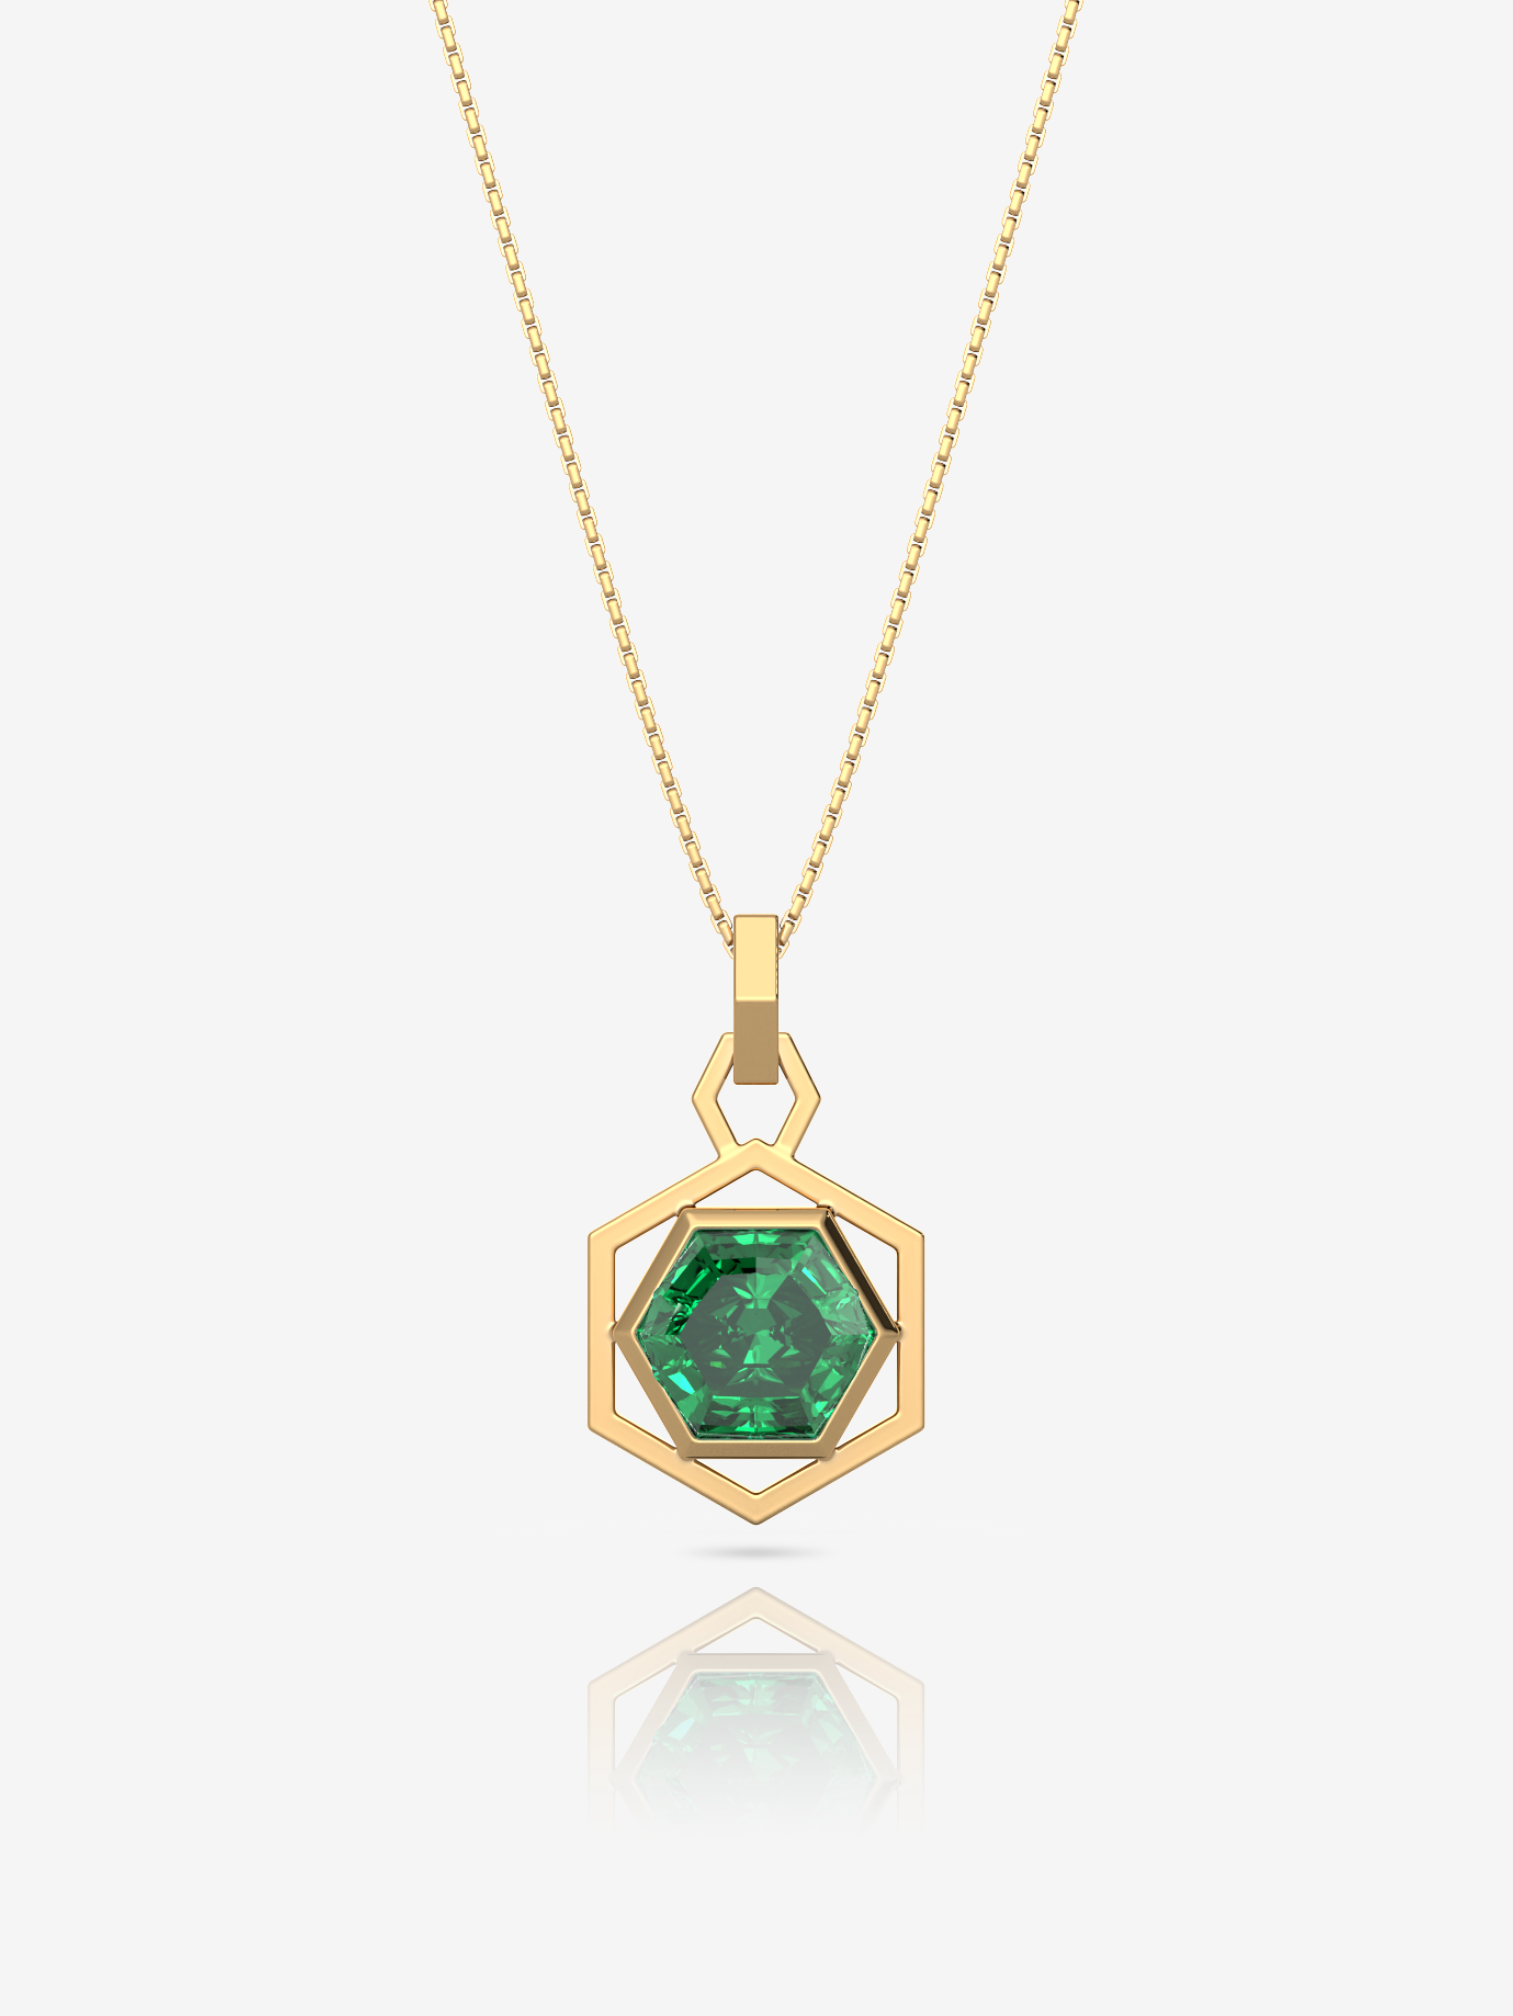 Sterling Silver Square Shape Hydro White Rhodium Plated Emerald Green  Pendant Surrounded With Studded White Cubic